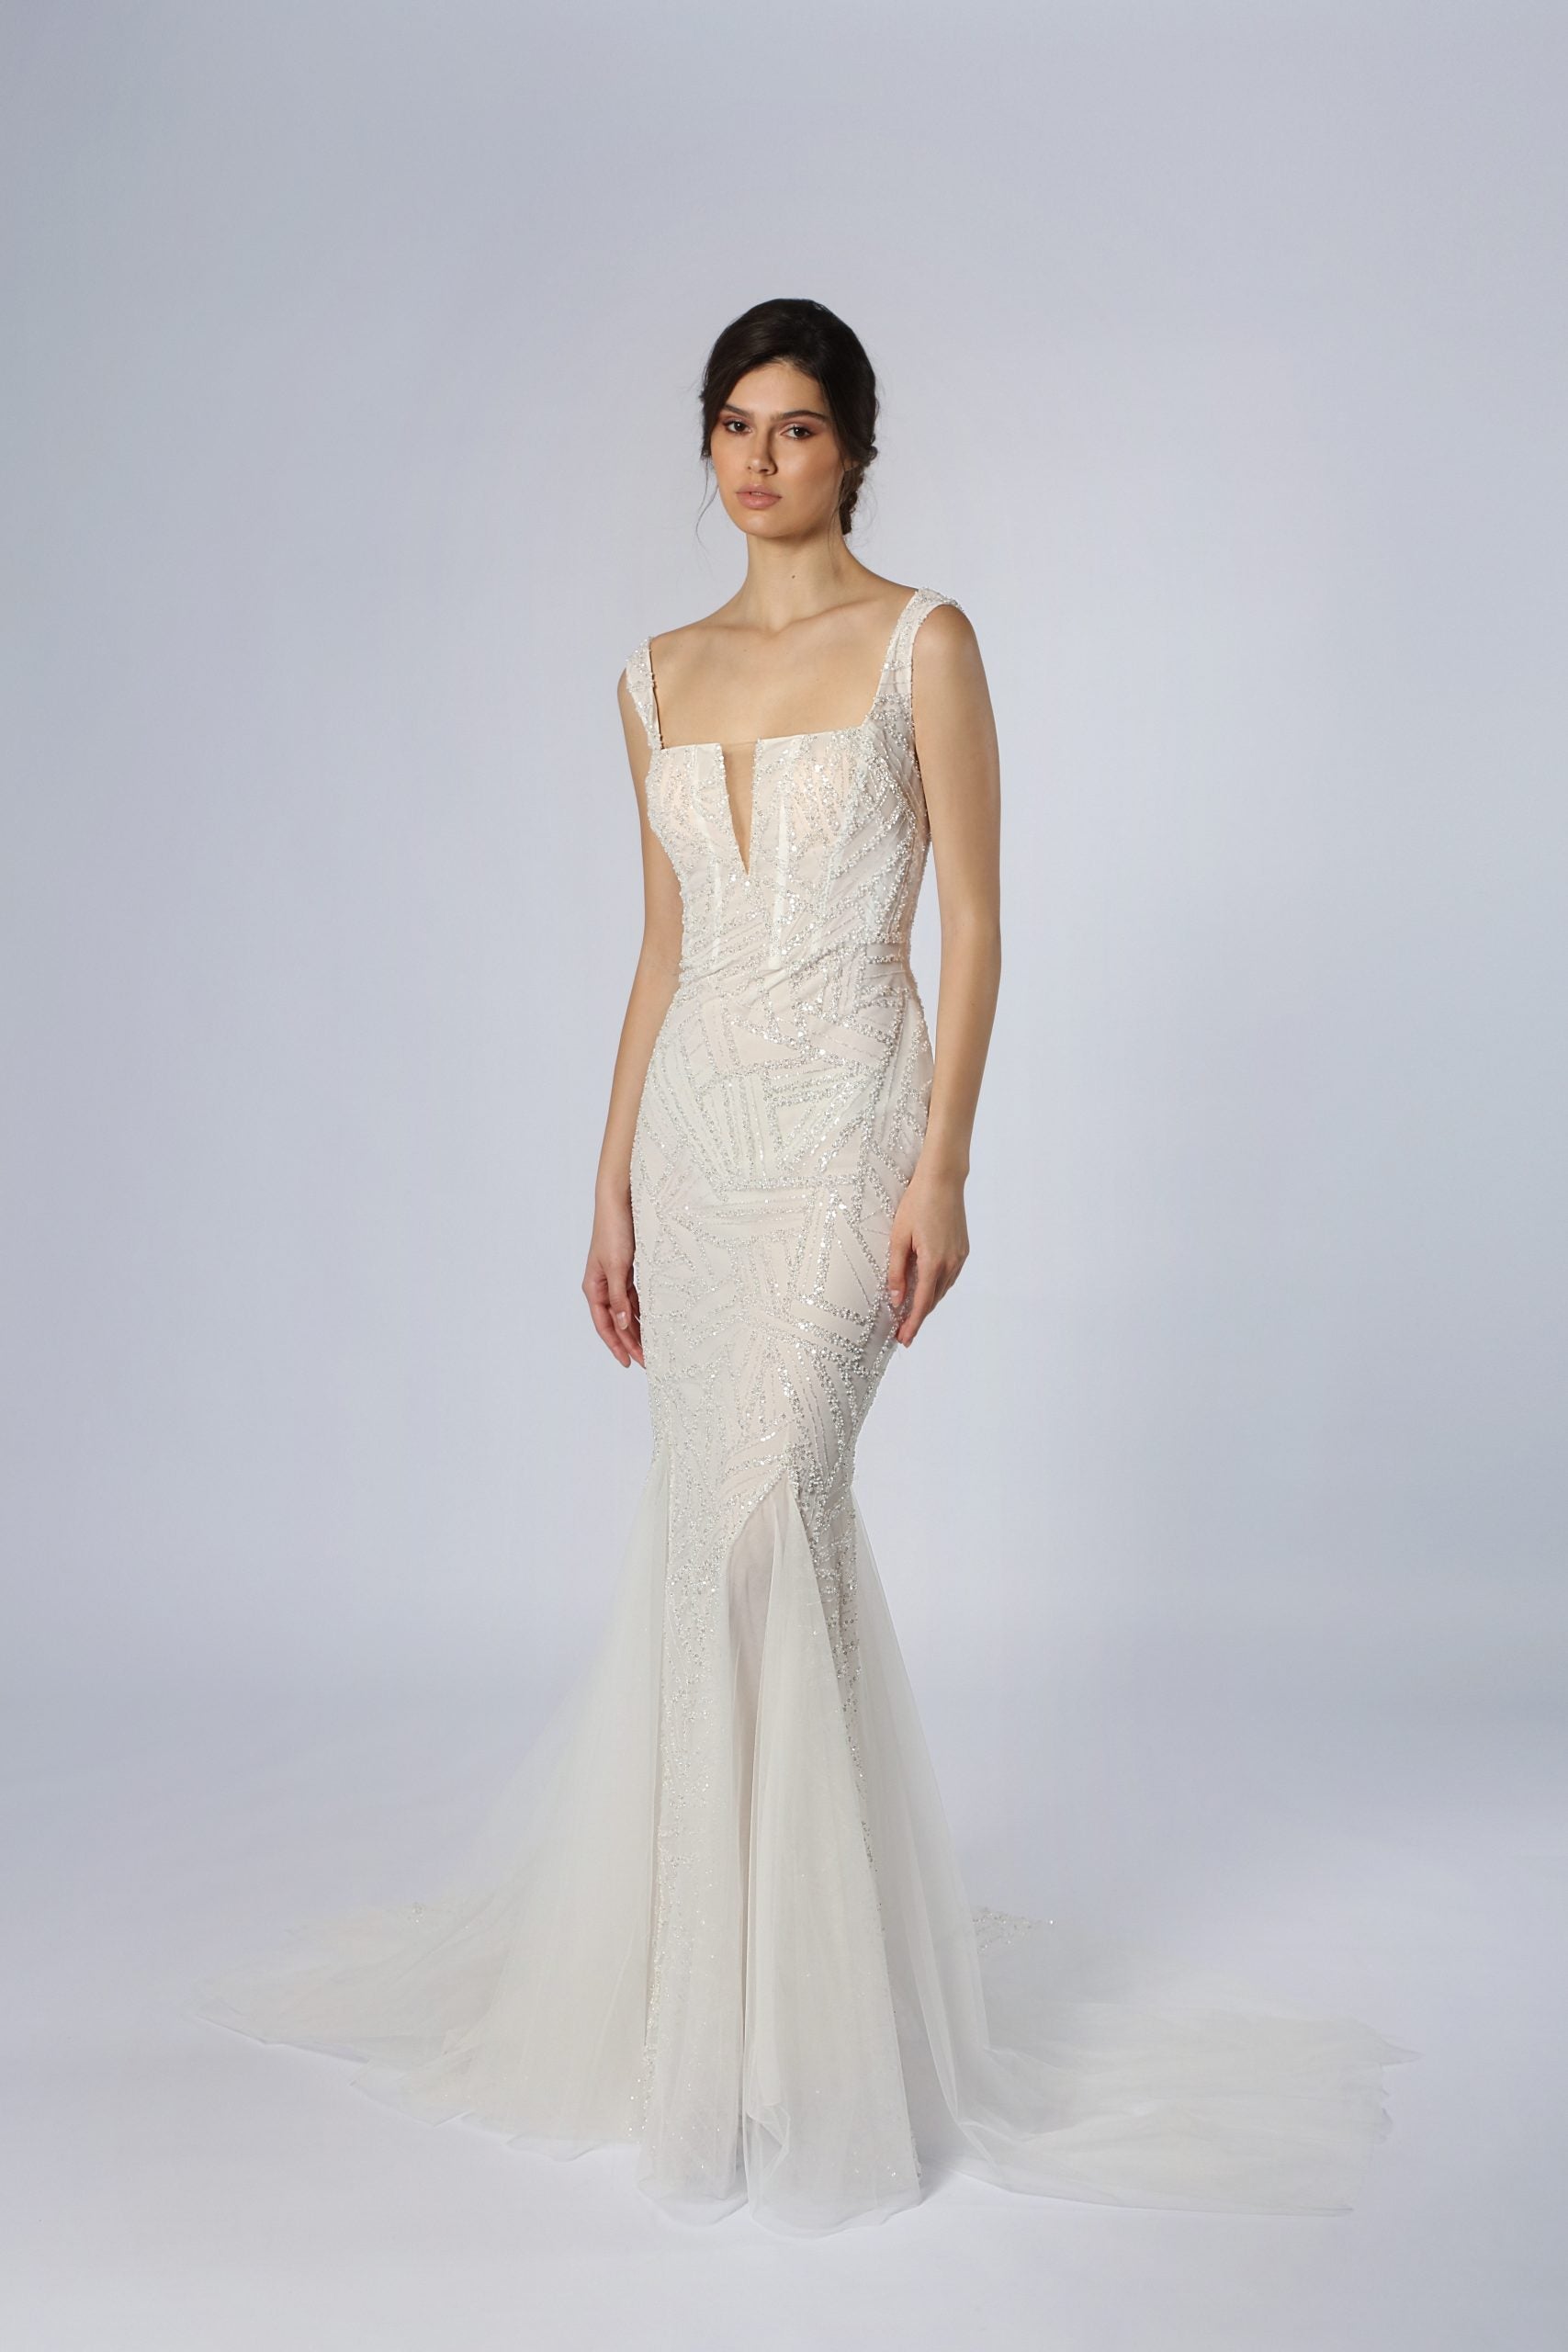 Silver Embroidered Fit-and-Flare Gown by Tony Ward - Image 1